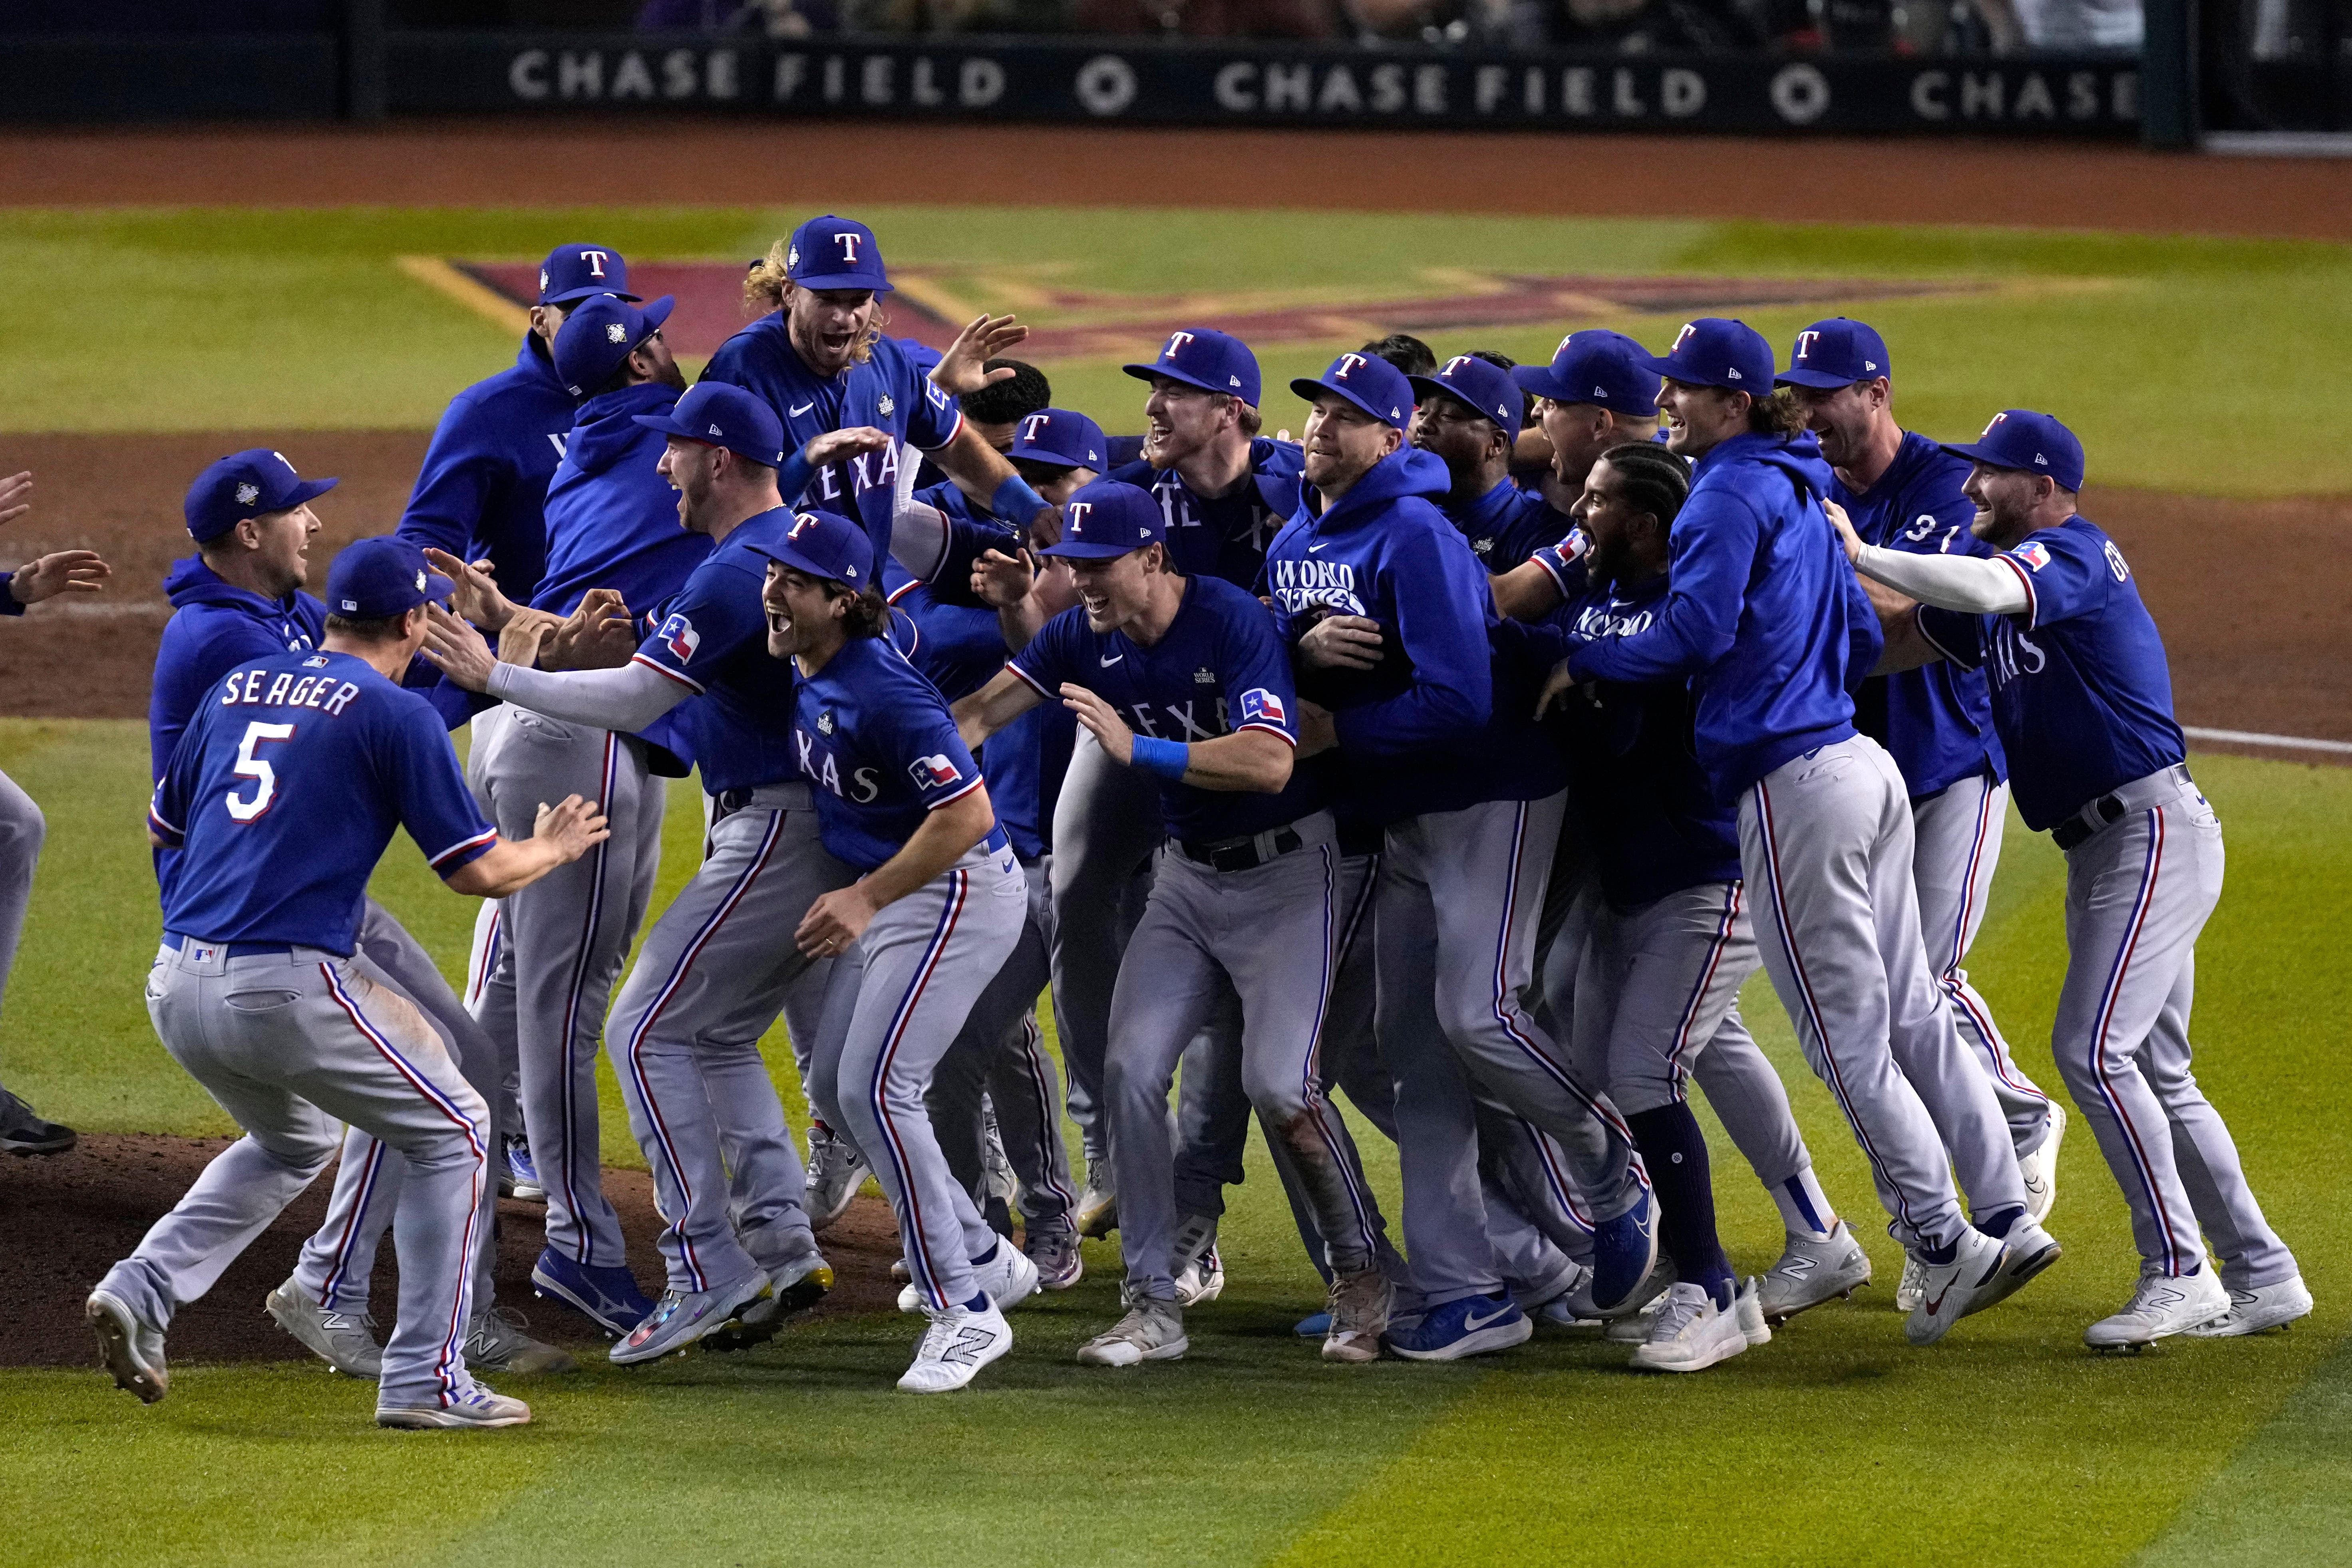 The Texas Rangers claimed their first World Series crown after 63 years of existence